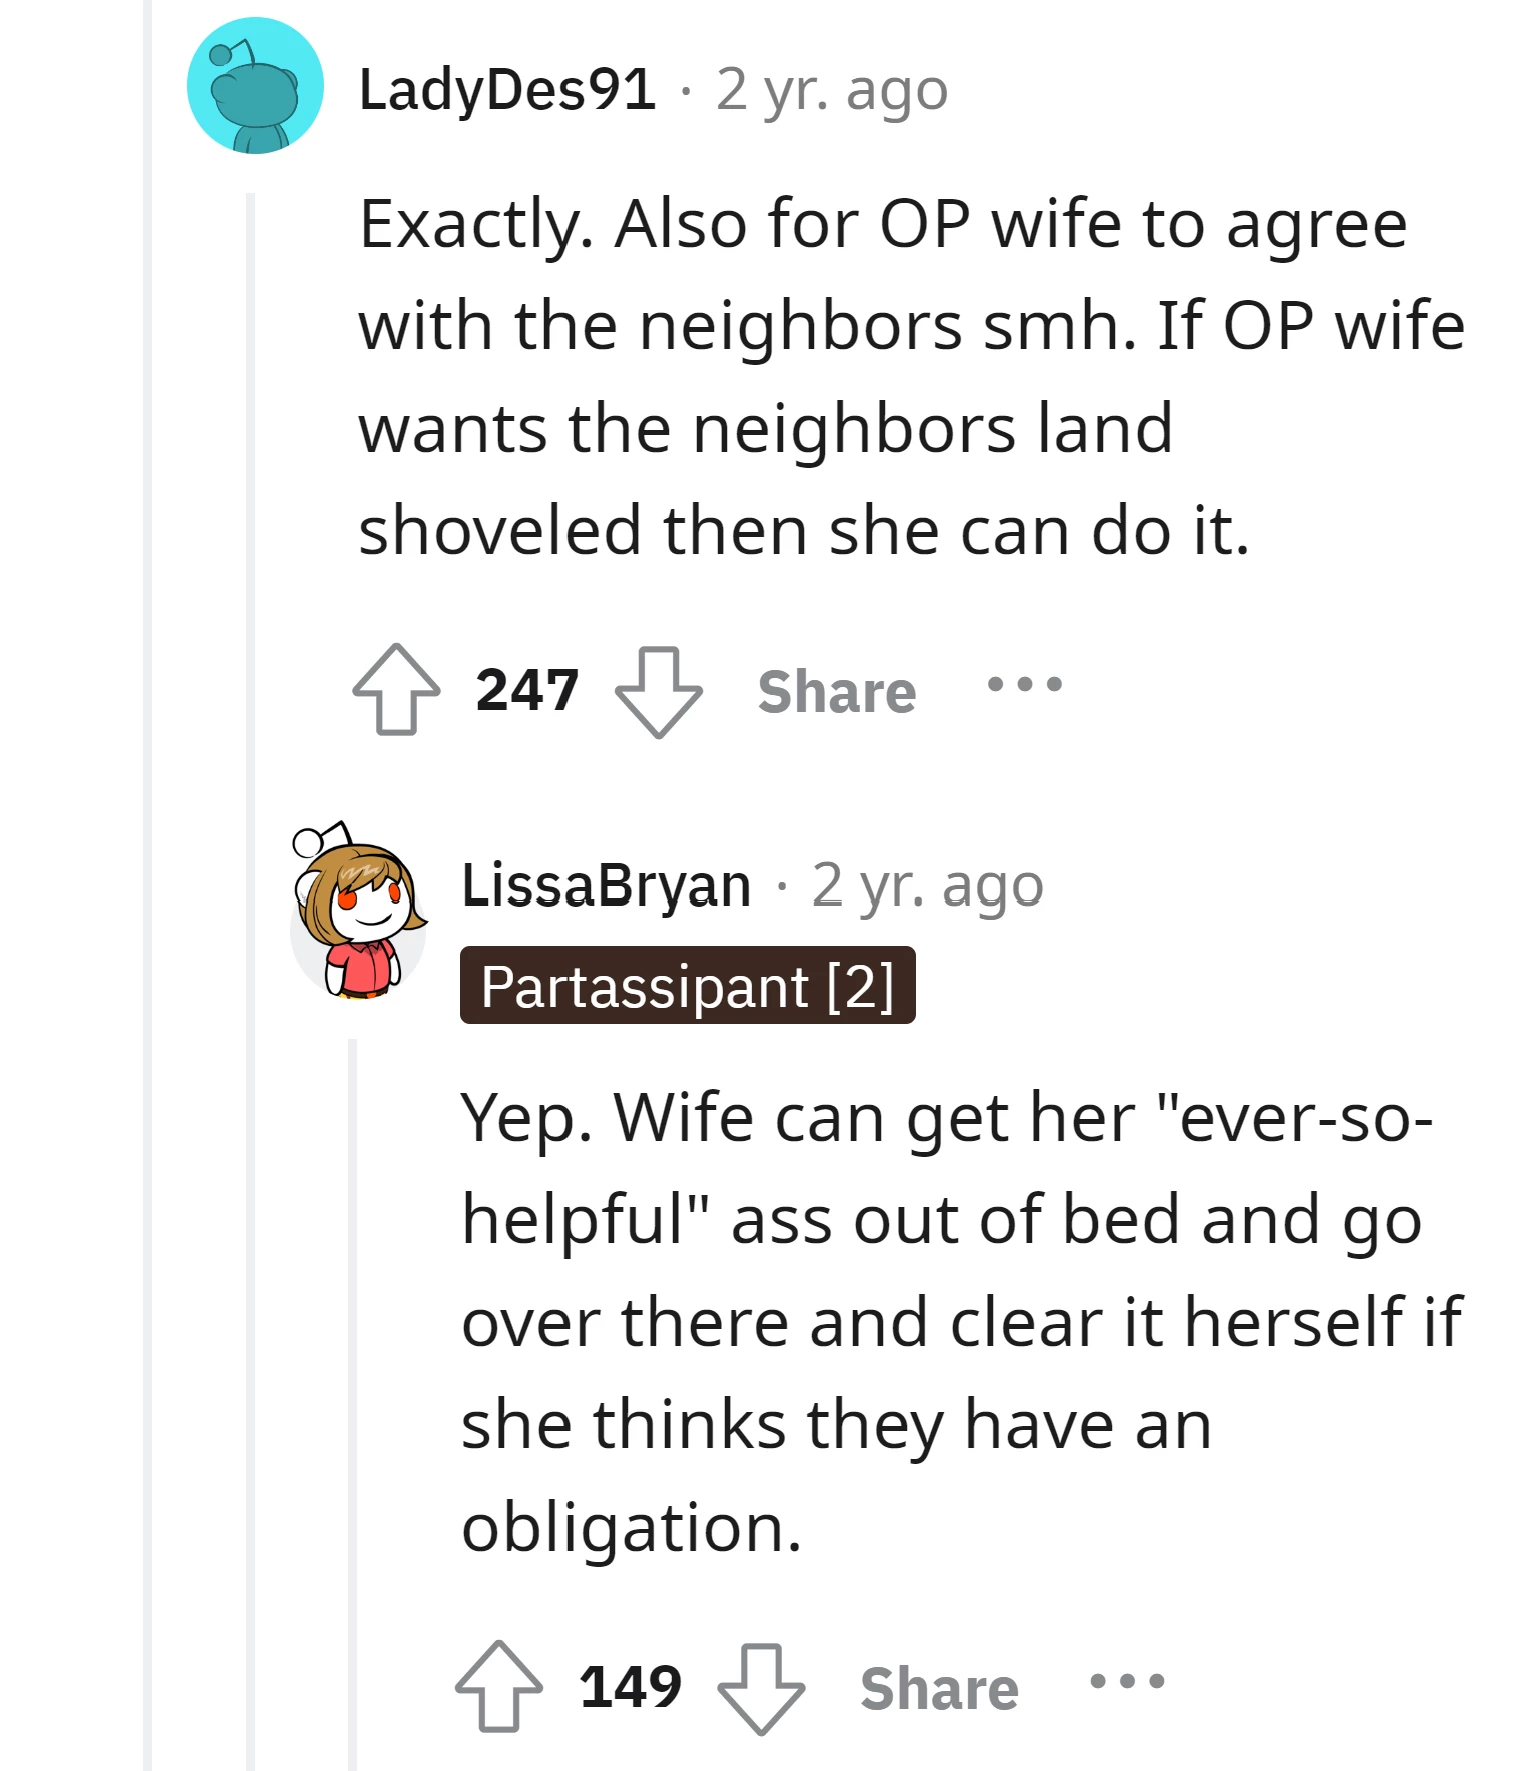 Indeed, it's weird that OP's wife agrees to it